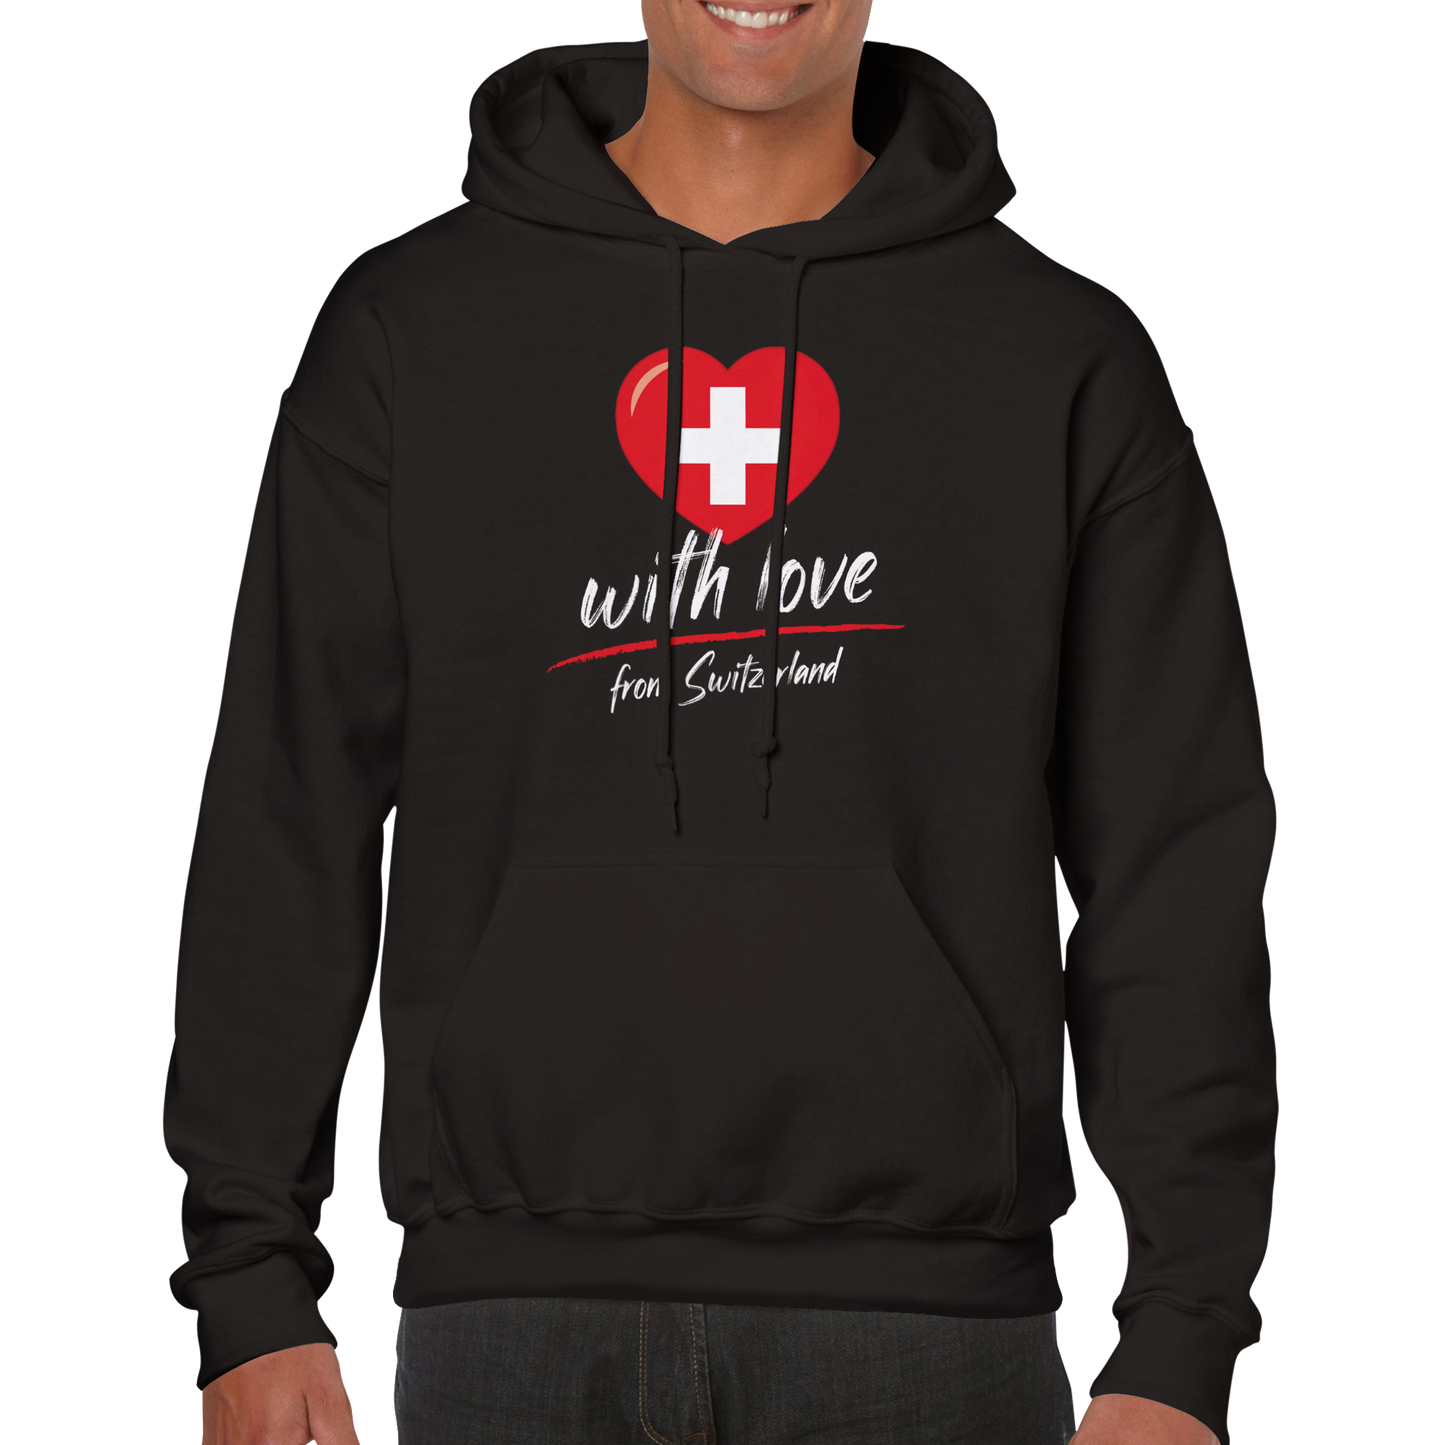 With love from Switzerland – Hoodie